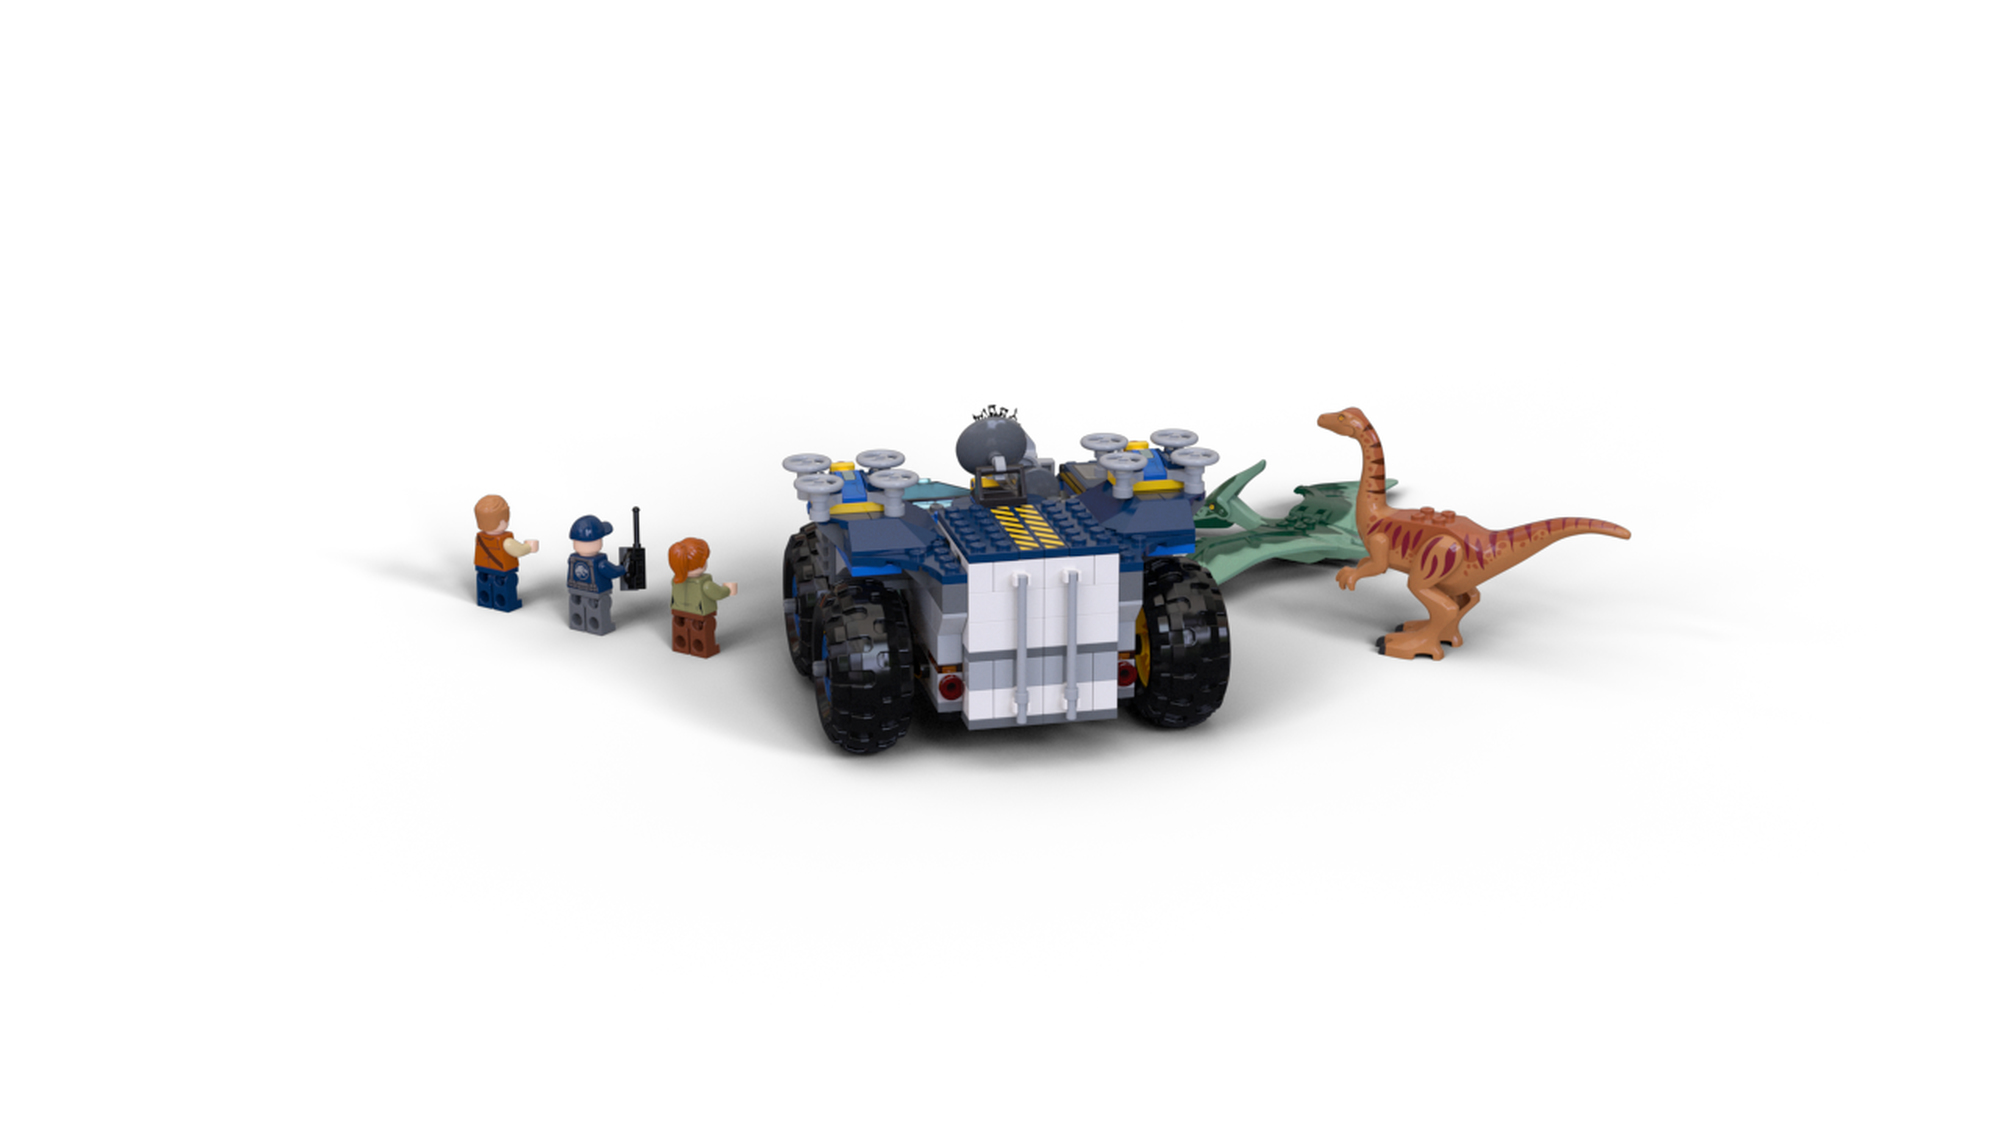  LEGO Jurassic World Gallimimus and Pteranodon Breakout 75940,  Dinosaur Building Kit for Kids, Featuring Owen Grady, Claire Dearing and  ACU Trooper Minifigures for Creative Play (391 Pieces) : Toys & Games